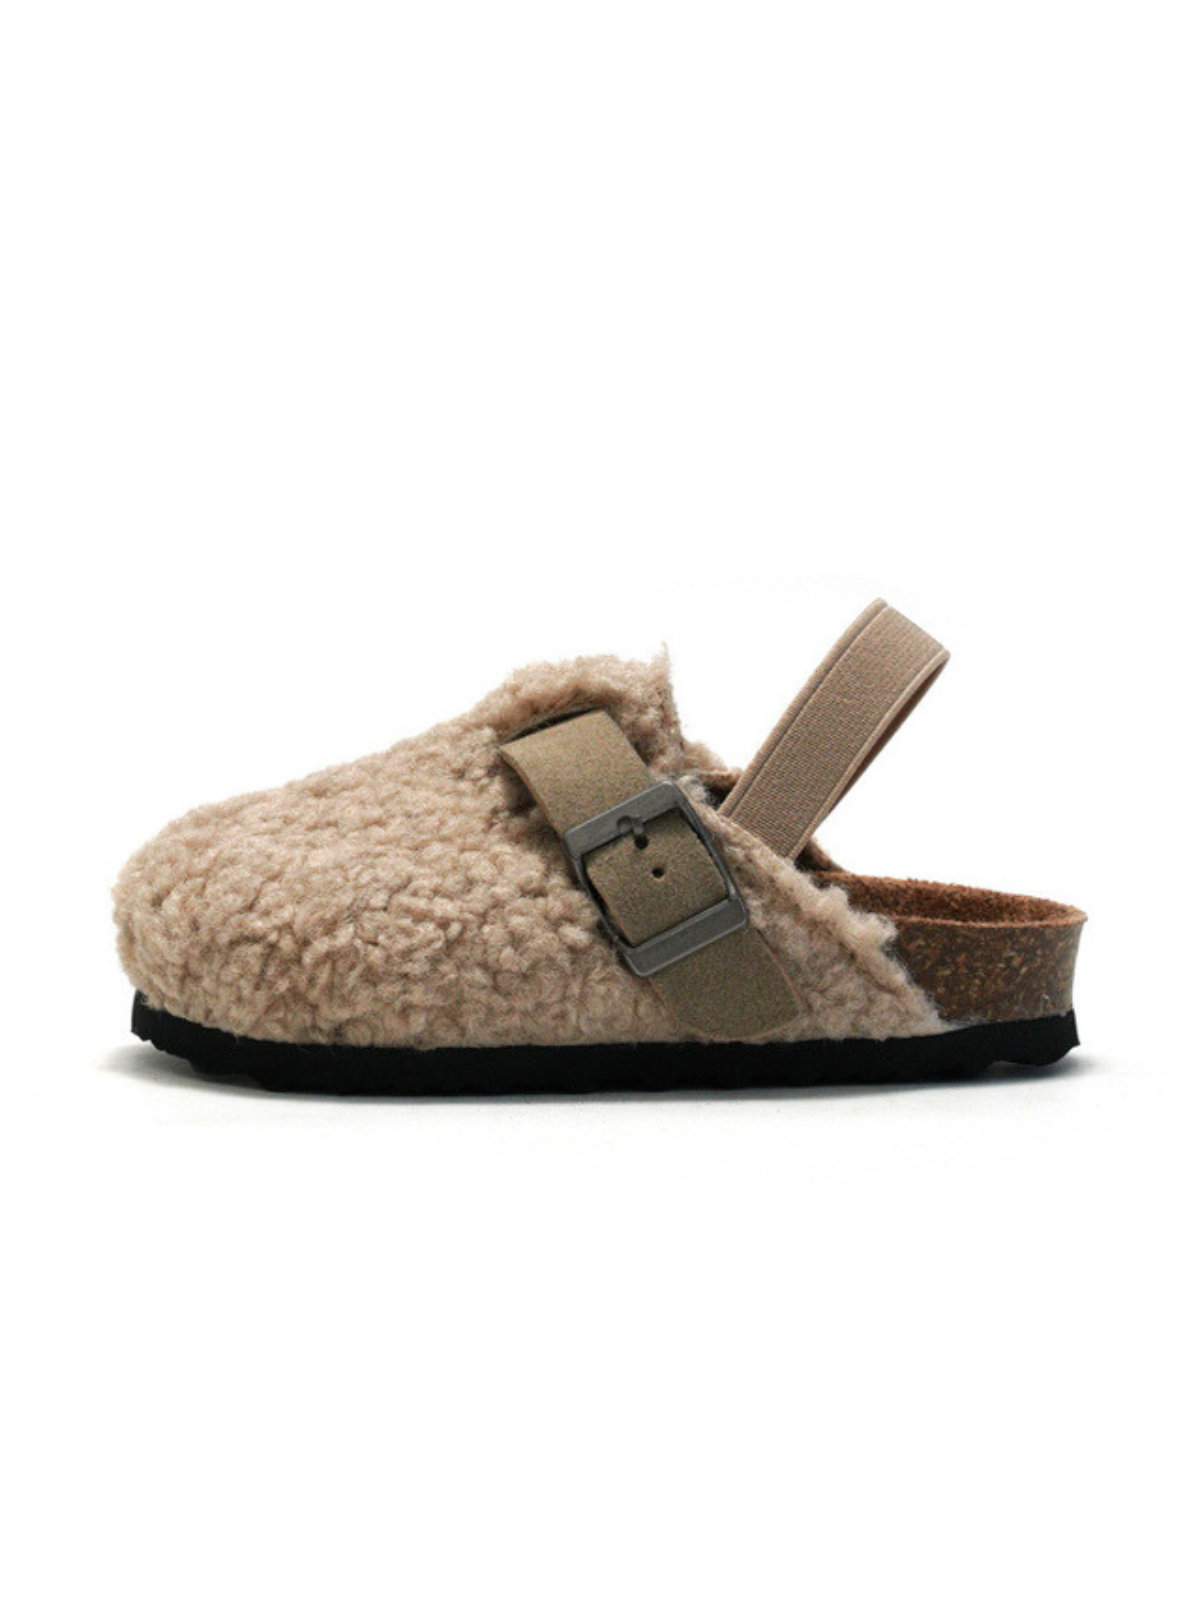 Shoes By Liv & Mia | Toddlers Wooly Loafers | Girls Boutique – Mia ...